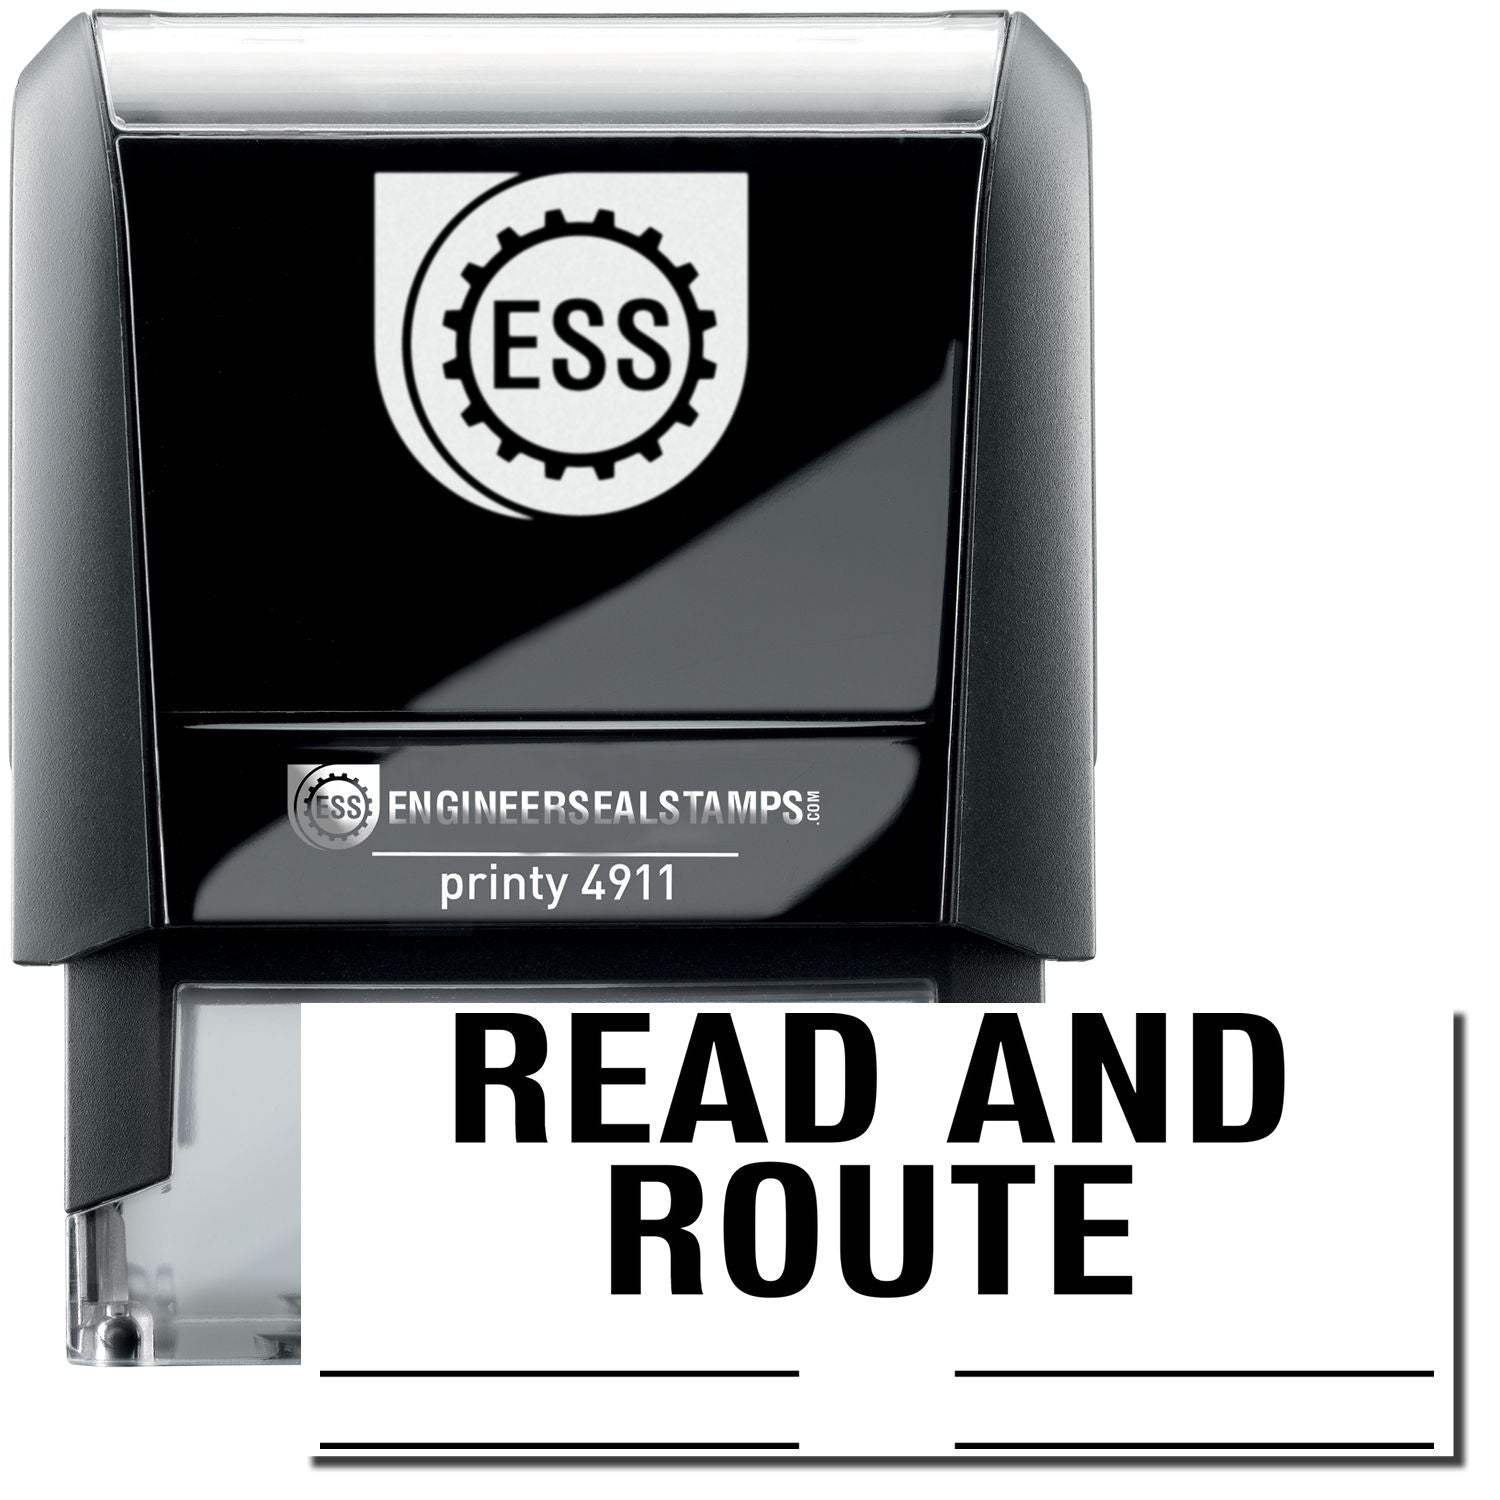 A self-inking stamp with a stamped image showing how the text "READ AND ROUTE" with lines below the text is displayed after stamping.